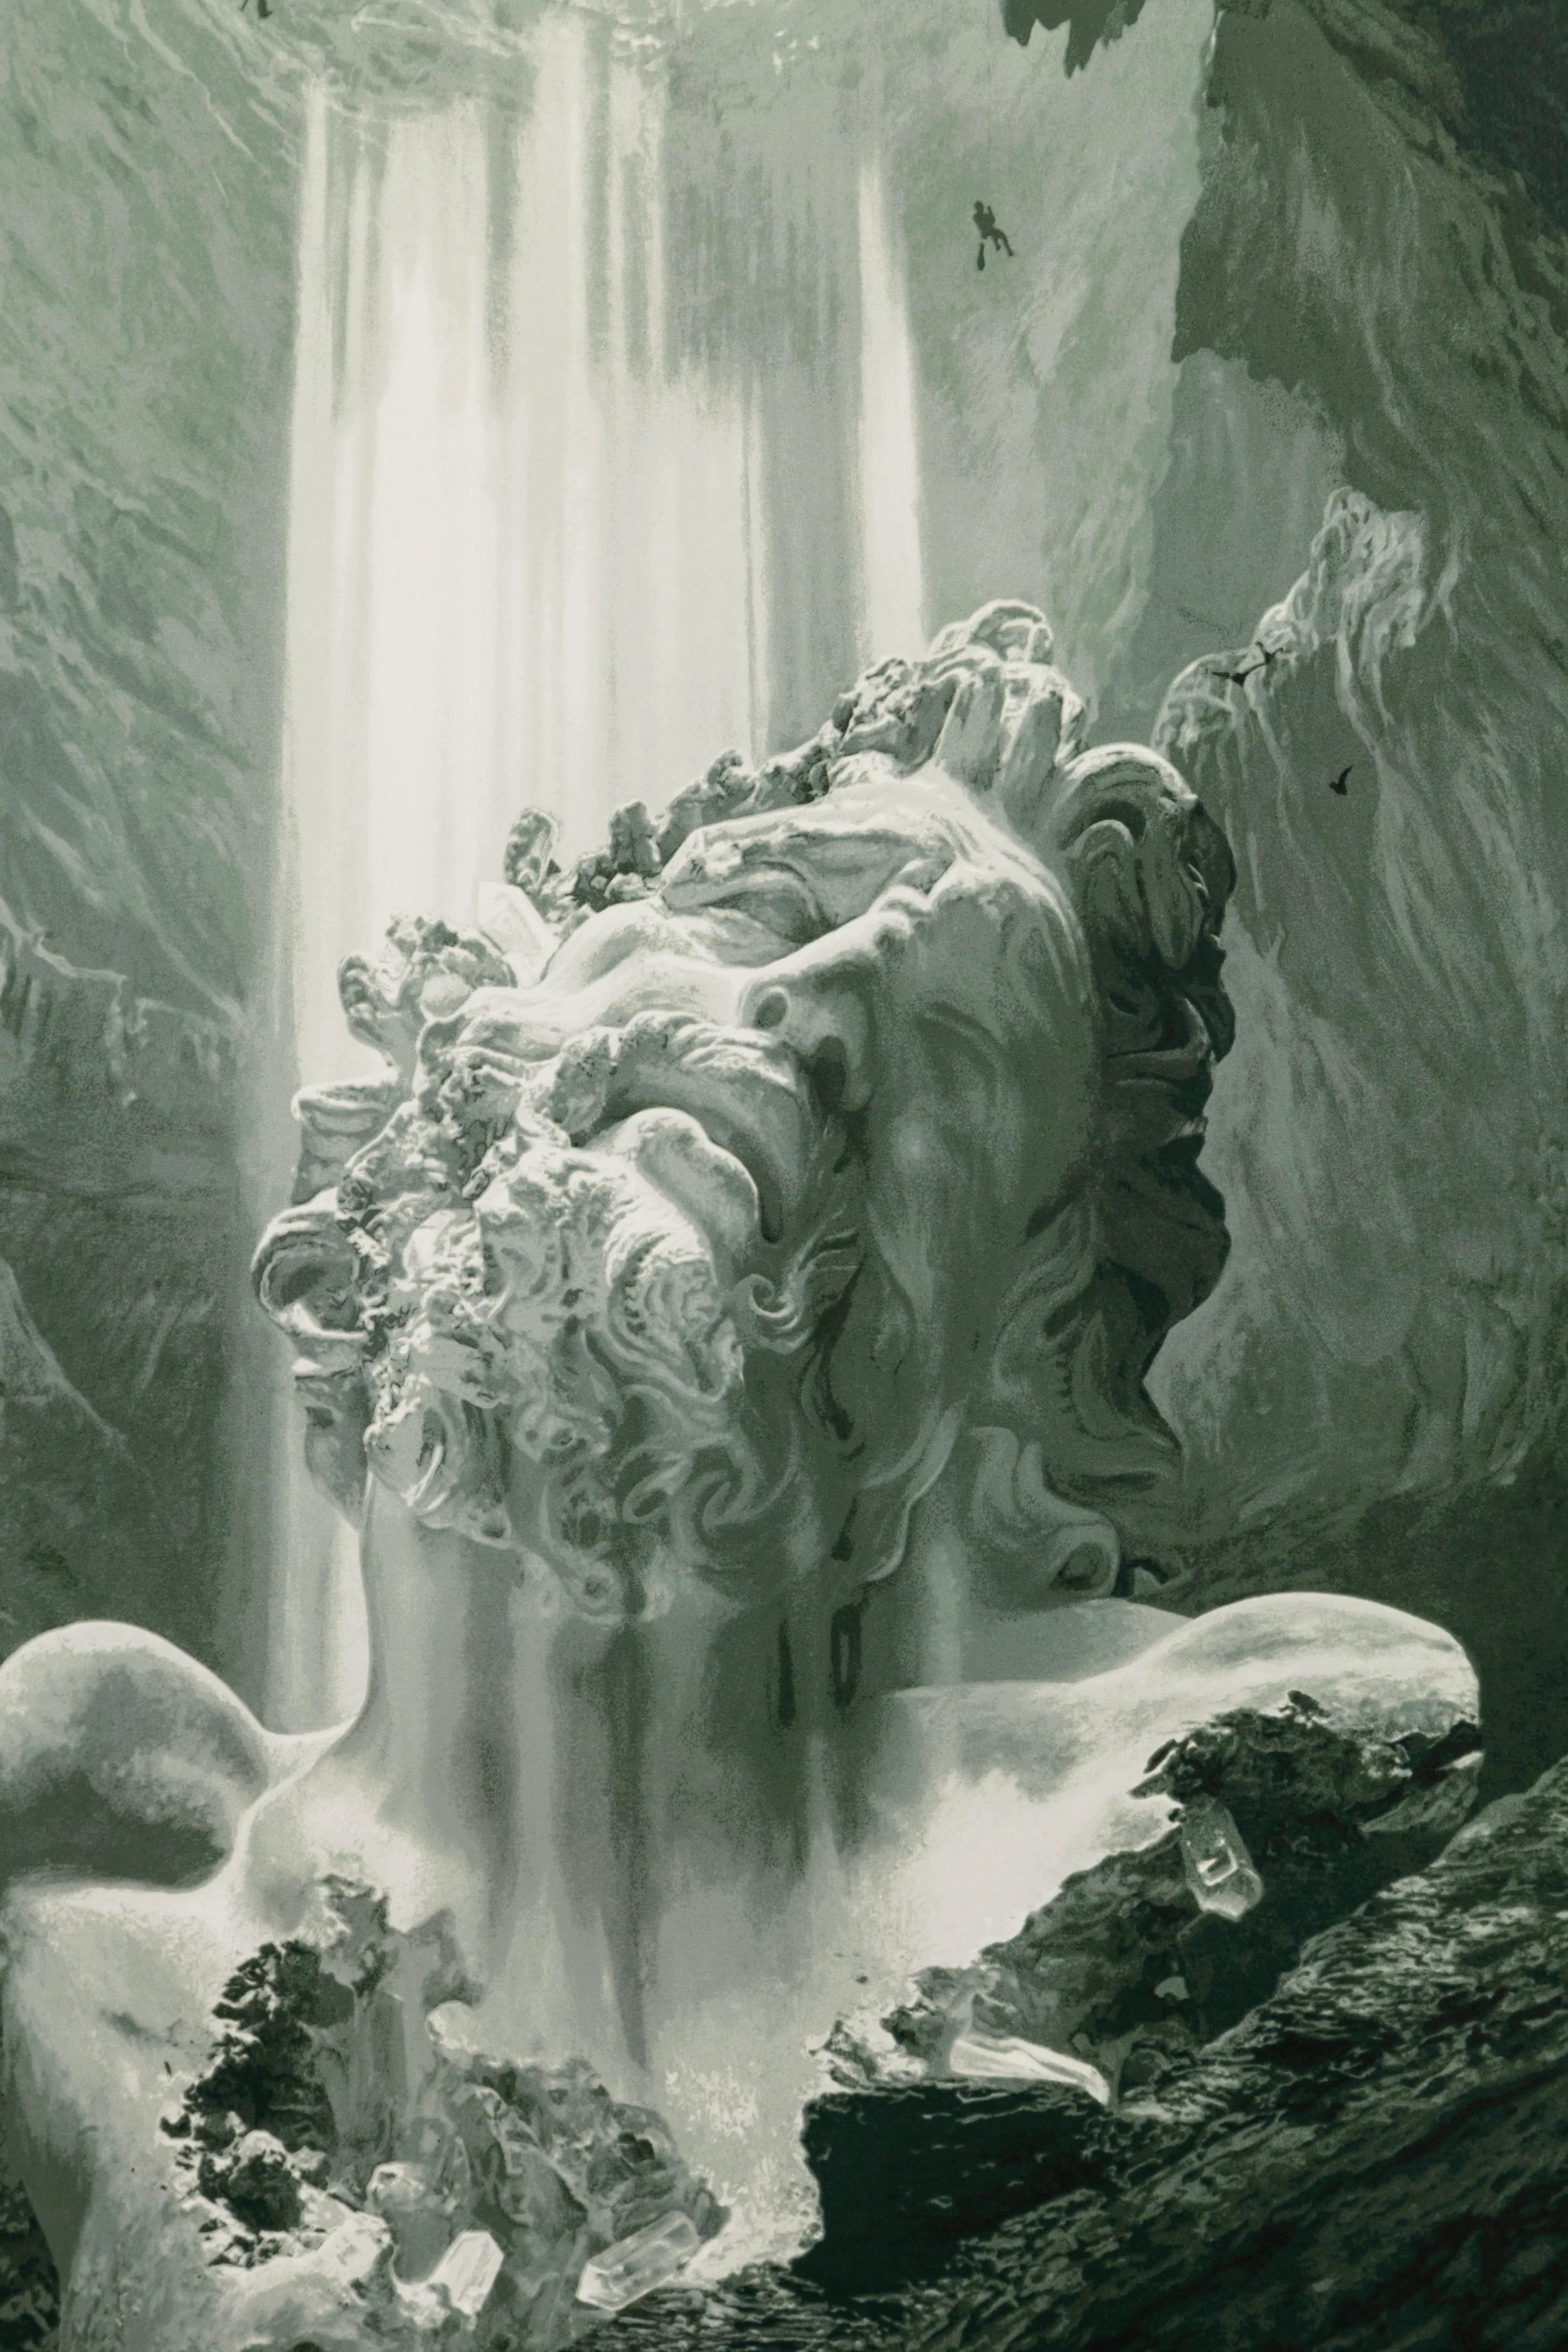 GROTTO OF LAOCOÖN Huge Hand signed. Modern Conceptual Statue Design Cave Relics - Print by Daniel Arsham